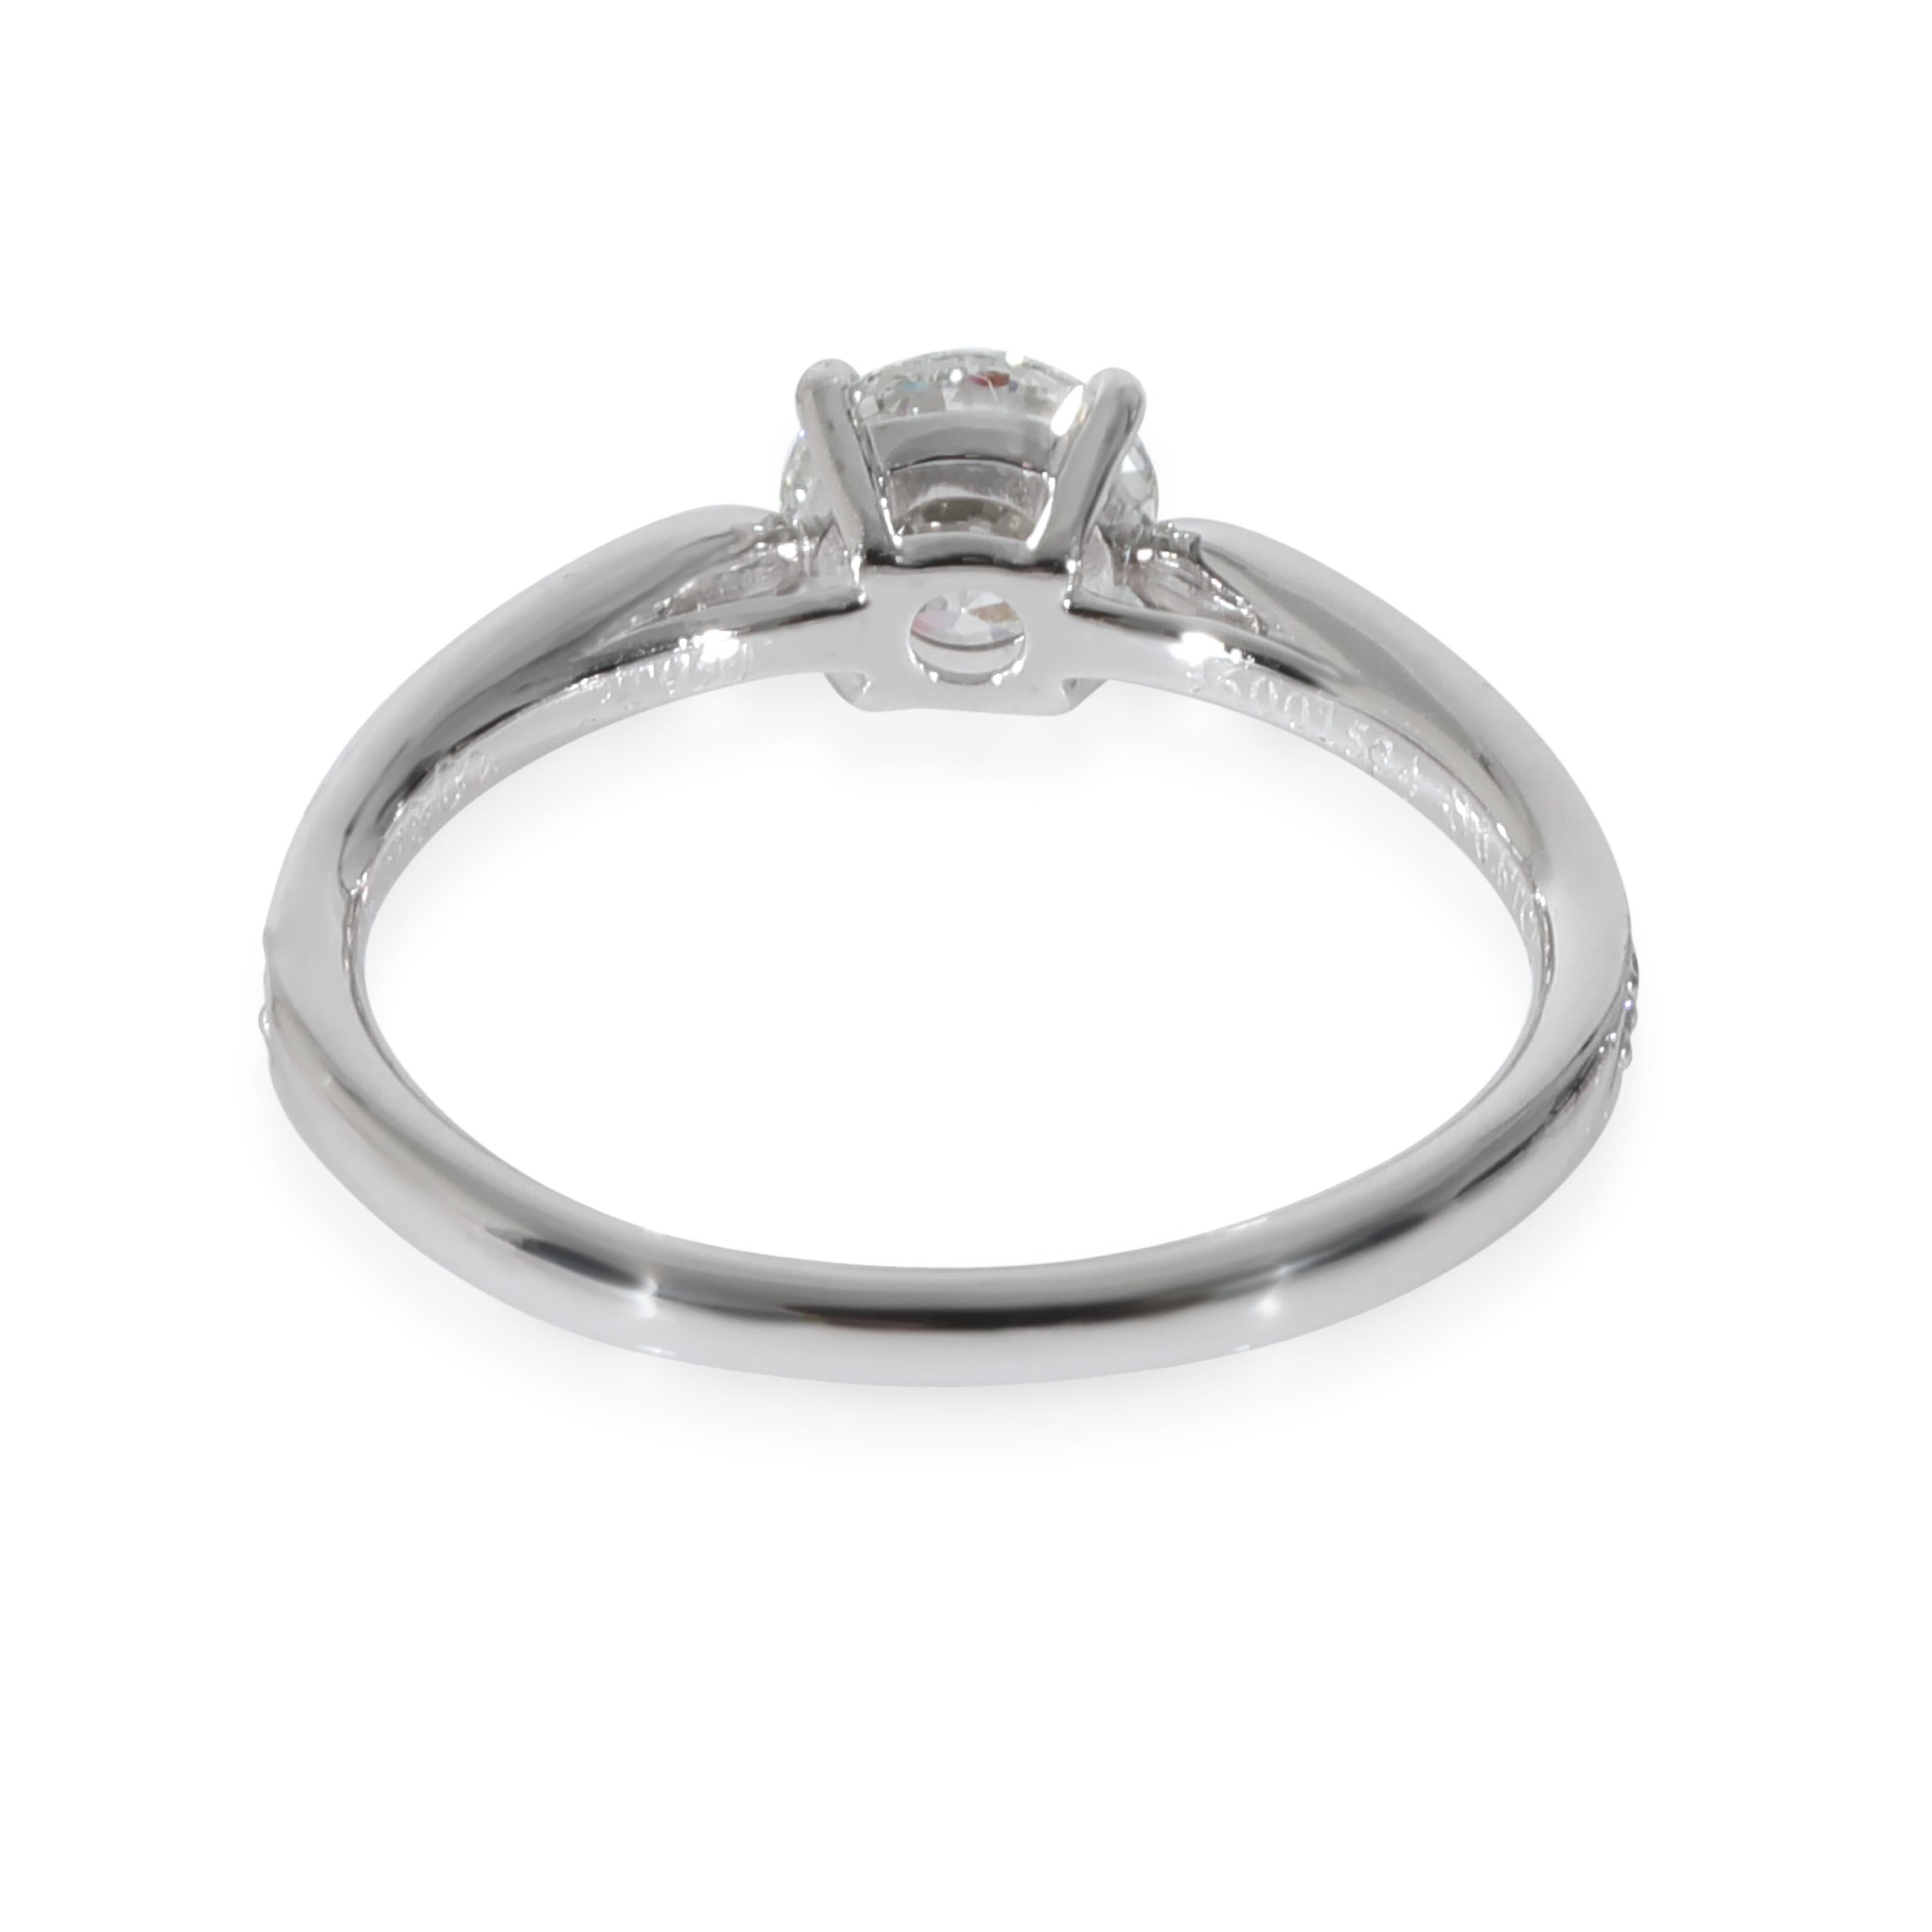 Tiffany & Co. Harmony Diamond Engagement Ring in  Platinum G VS1 0.77 CT

PRIMARY DETAILS
SKU: 130018
Listing Title: Tiffany & Co. Harmony Diamond Engagement Ring in  Platinum G VS1 0.77 CT
Condition Description: A study in harmony and balance. The